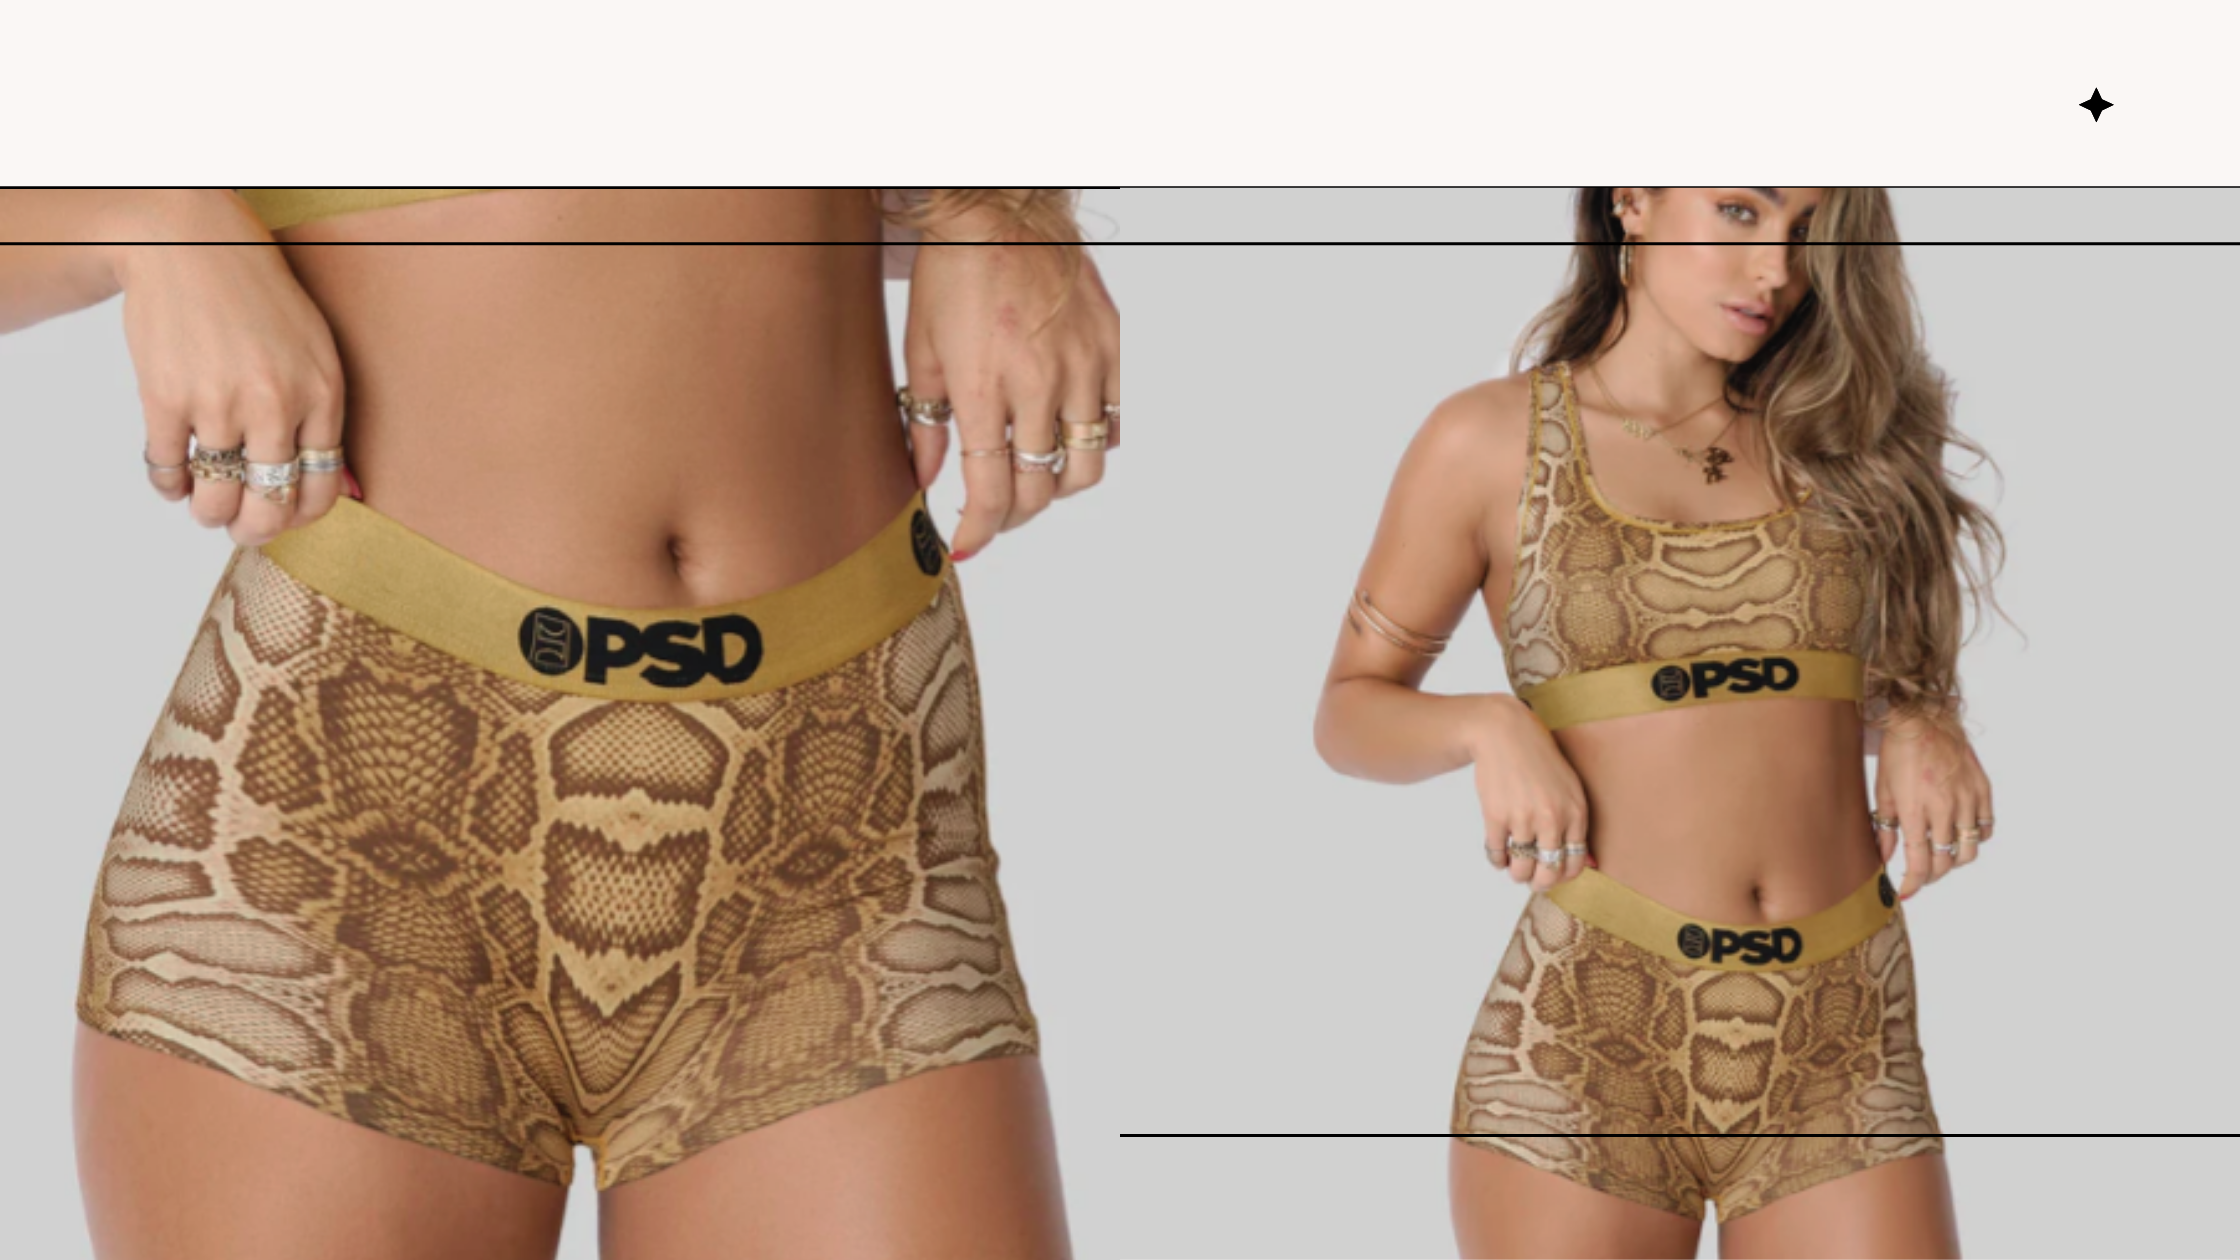 PSD Underwear on X: 🦁 @sommerray collection is on 🔥🔥 Cop them